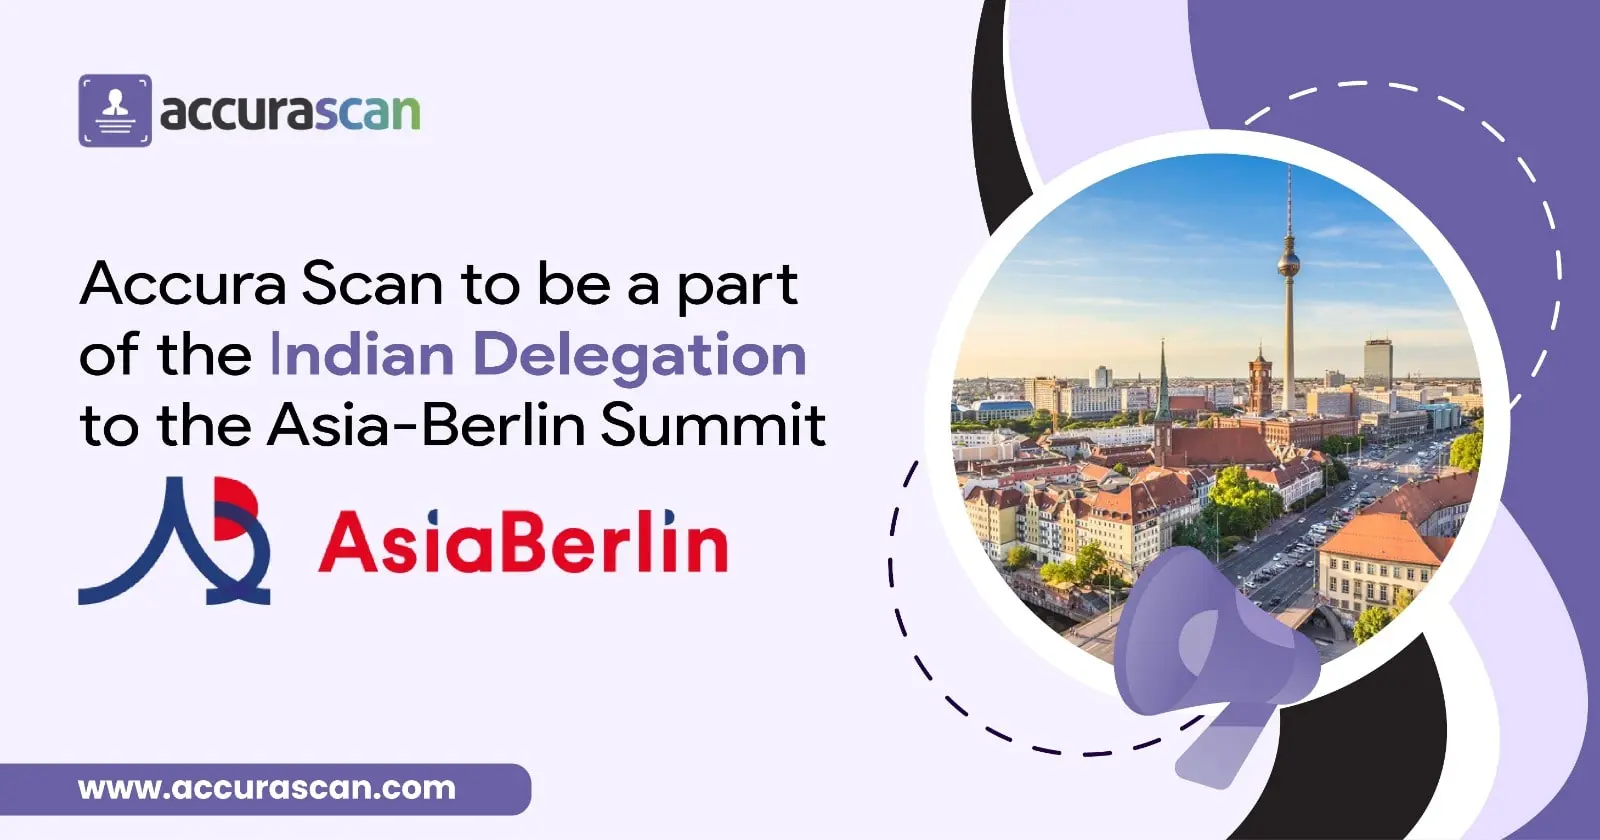 Accura Scan to be a part of the Indian Delegation to the Asia-Berlin Summit